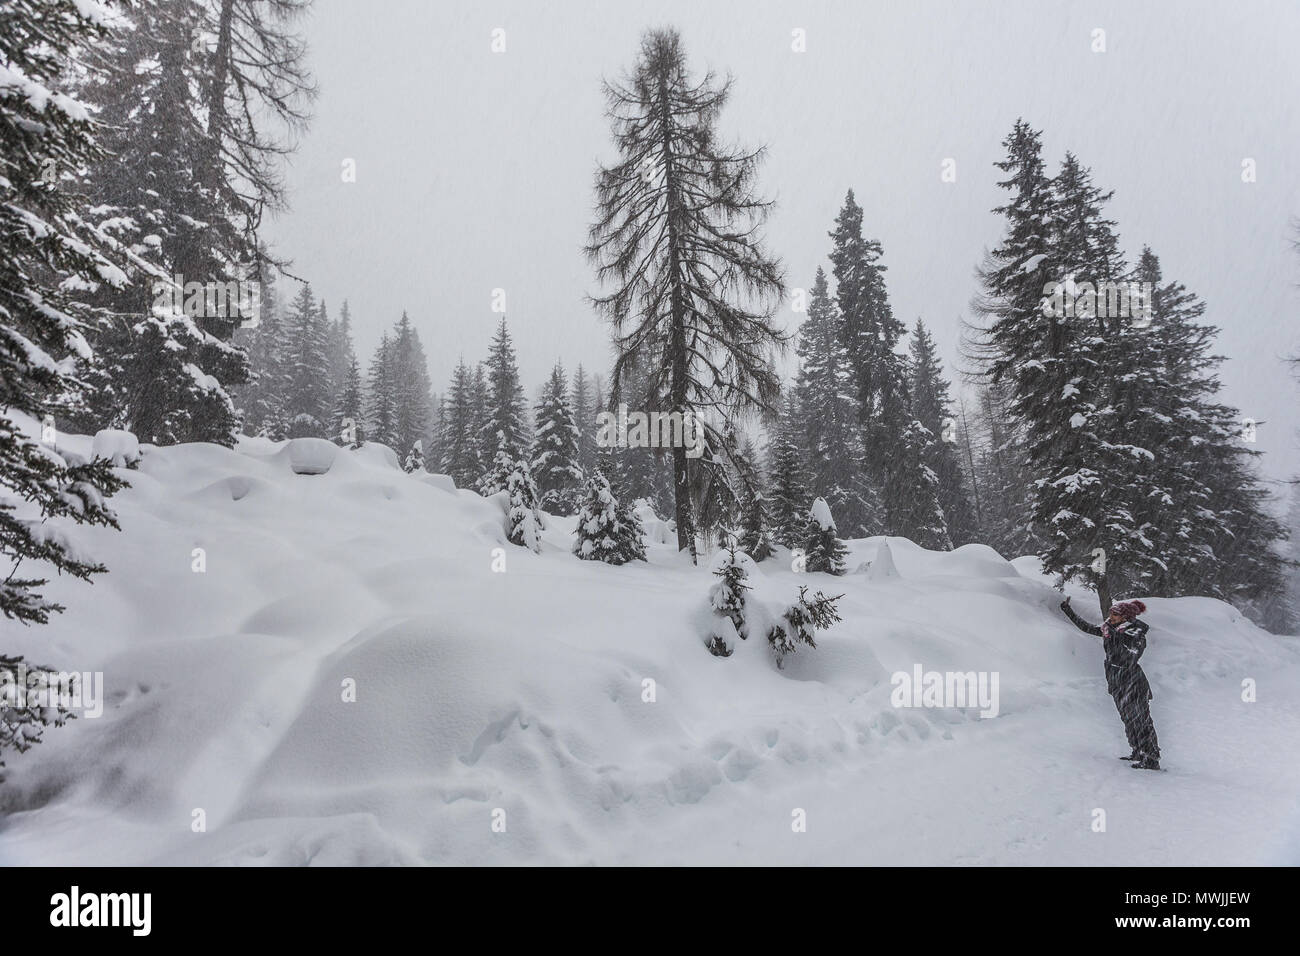 SELVA DI CADORE, ITALY - JANUARY 03 2018: Girl making a photo with her cell phone under a heavy snowfall Stock Photo